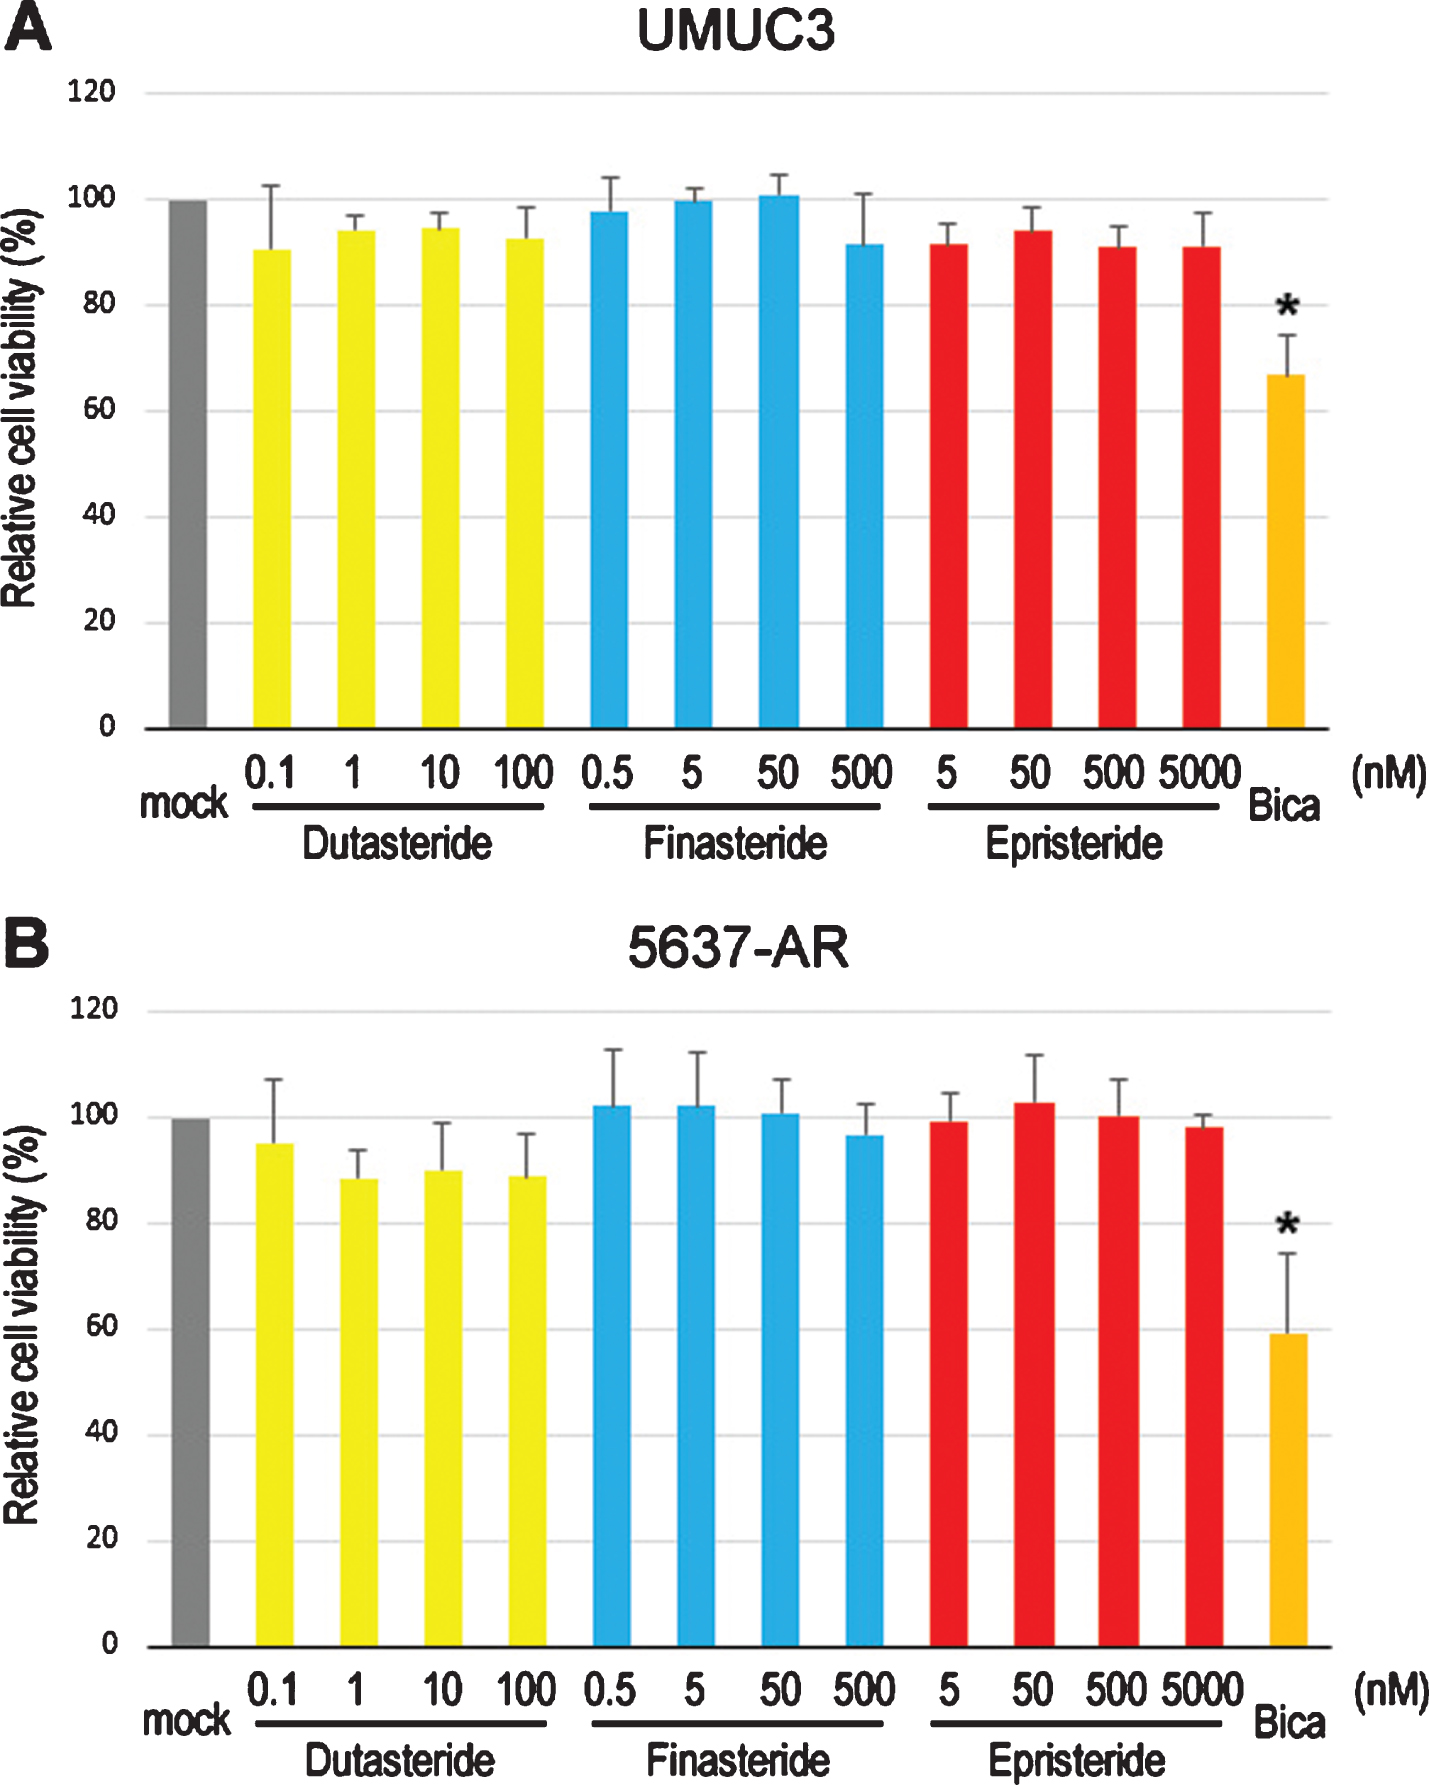 Effects of 5α-RIs on the viability of bladder cancer cells. MTT assay in UMUC3 (A) and 5637-AR (B) cells cultured in medium containing 5% FBS as well as ethanol (mock), dutasteride (0.1–100 nM), finasteride (0.5–500 nM), epristeride (5–5000 nM), or bicalutamide (Bica; 5μM) for 96 hours. Cell viability is presented relative to that in each line with mock treatment. Each value represents the mean (+SD) from three independent experiments. *P < 0.05 (vs. mock treatment).